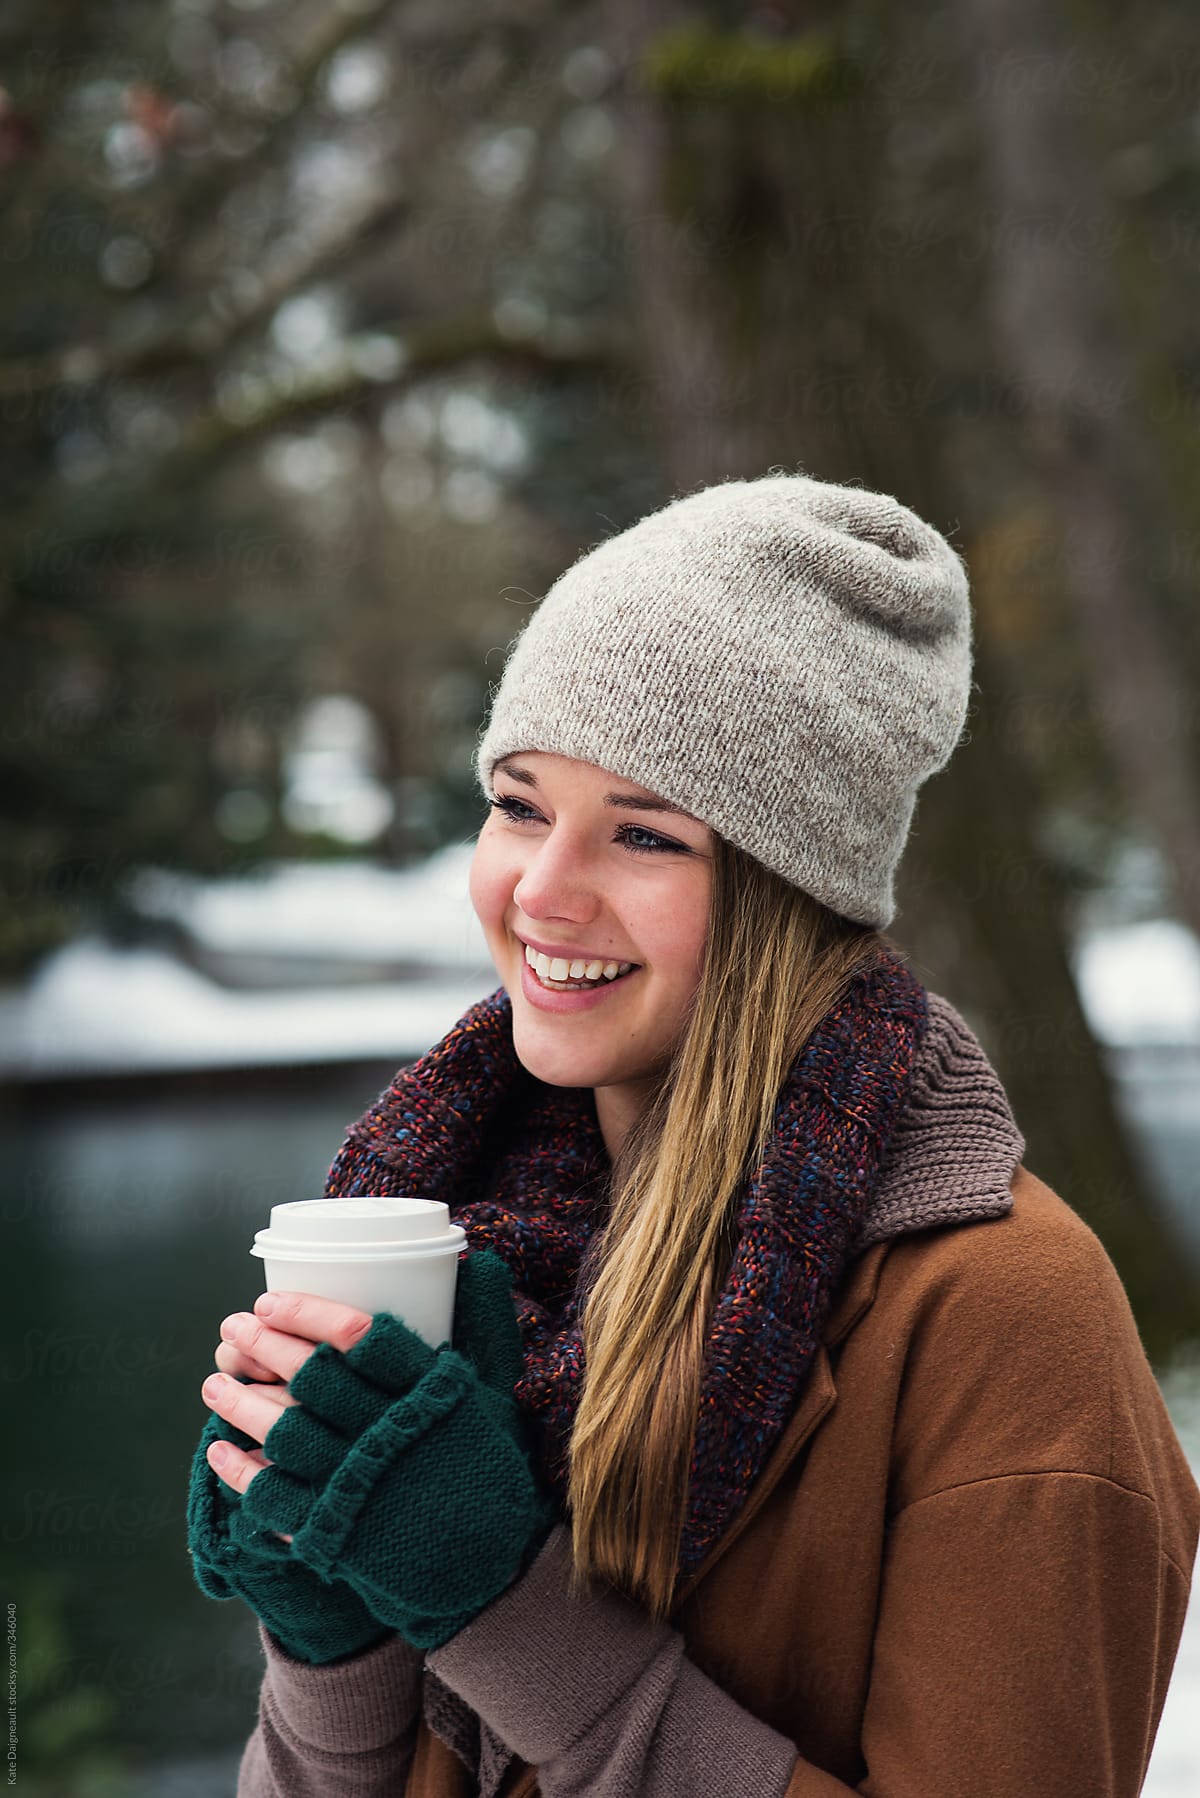 A young woman hold a hot beverage in the park in winter.